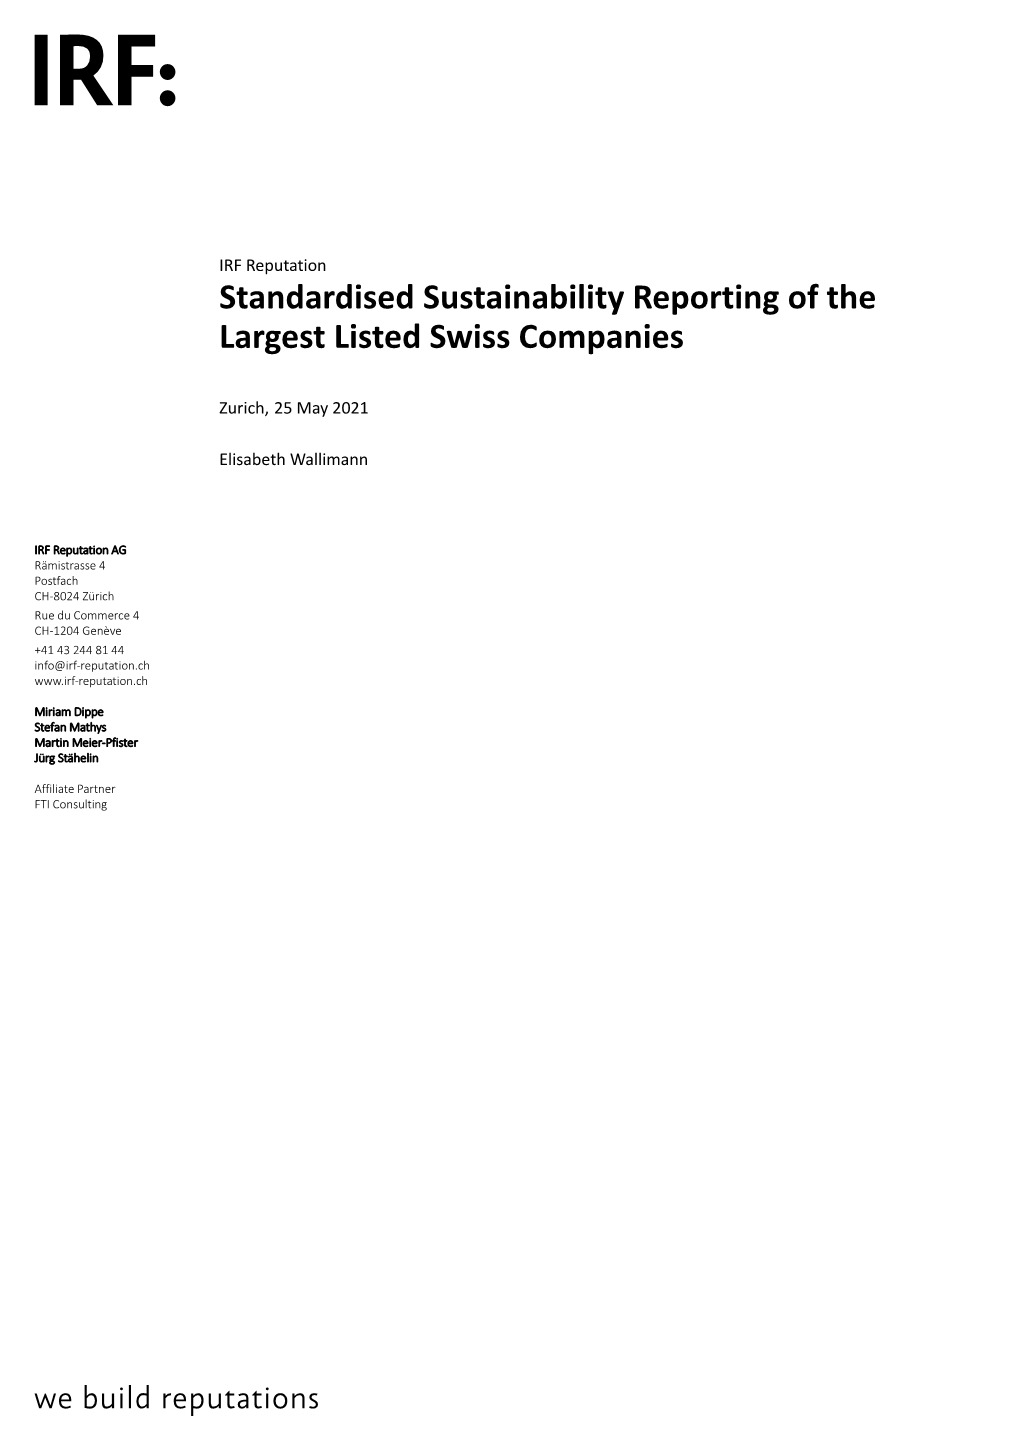 Standardised Sustainability Reporting of the Largest Listed Swiss Companies